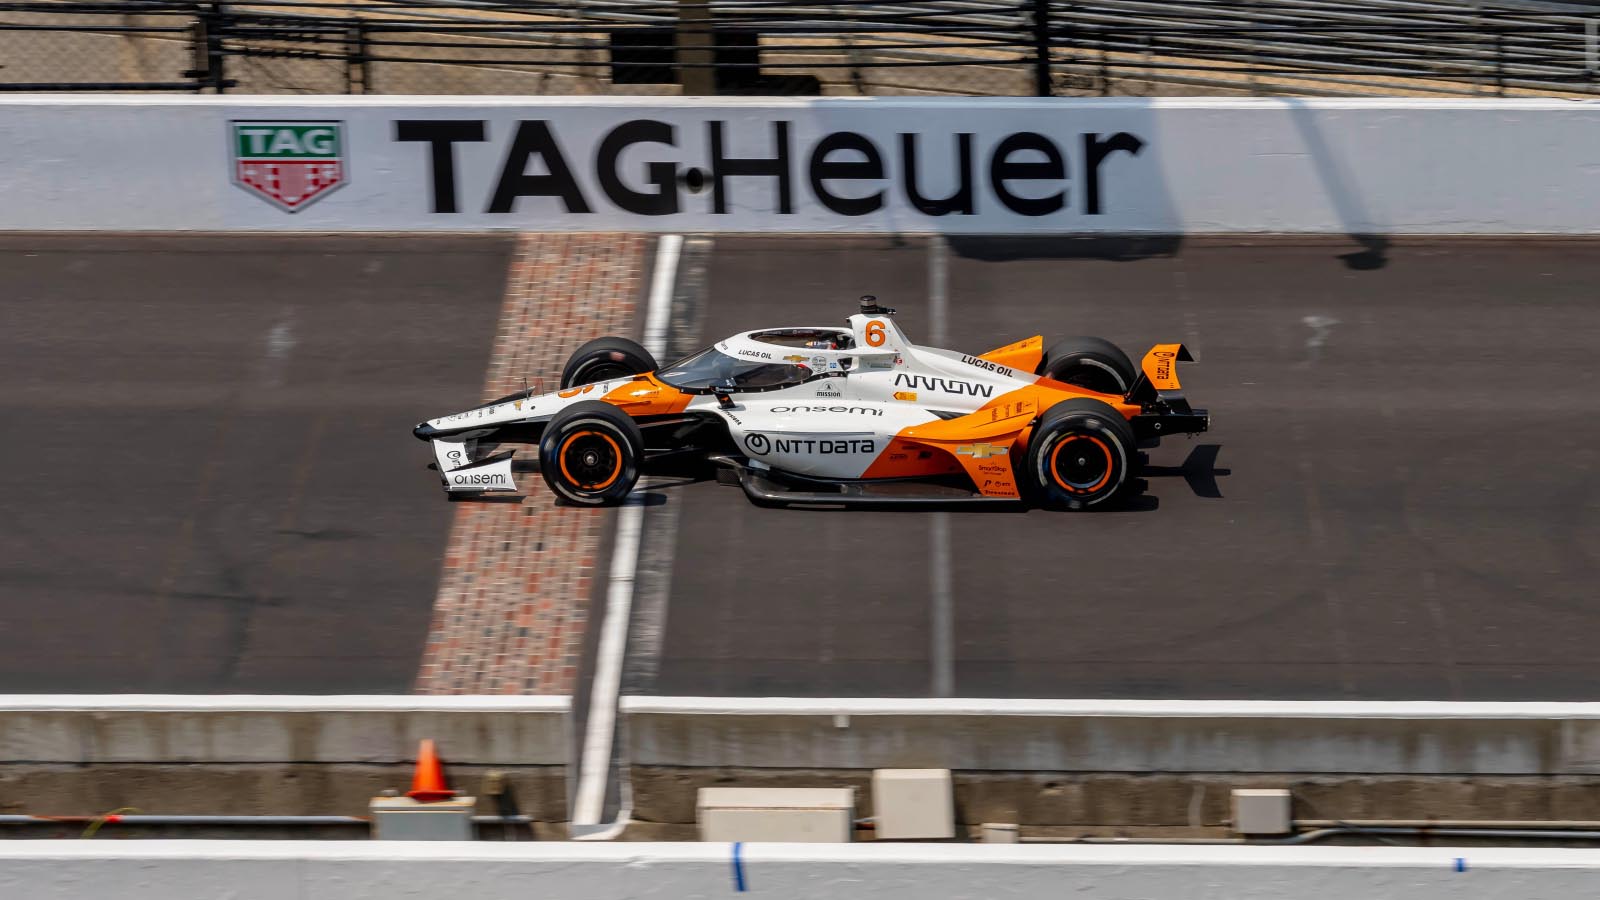 Indianapolis 500 qualifying Arrow McLaren driver goes P1 in action